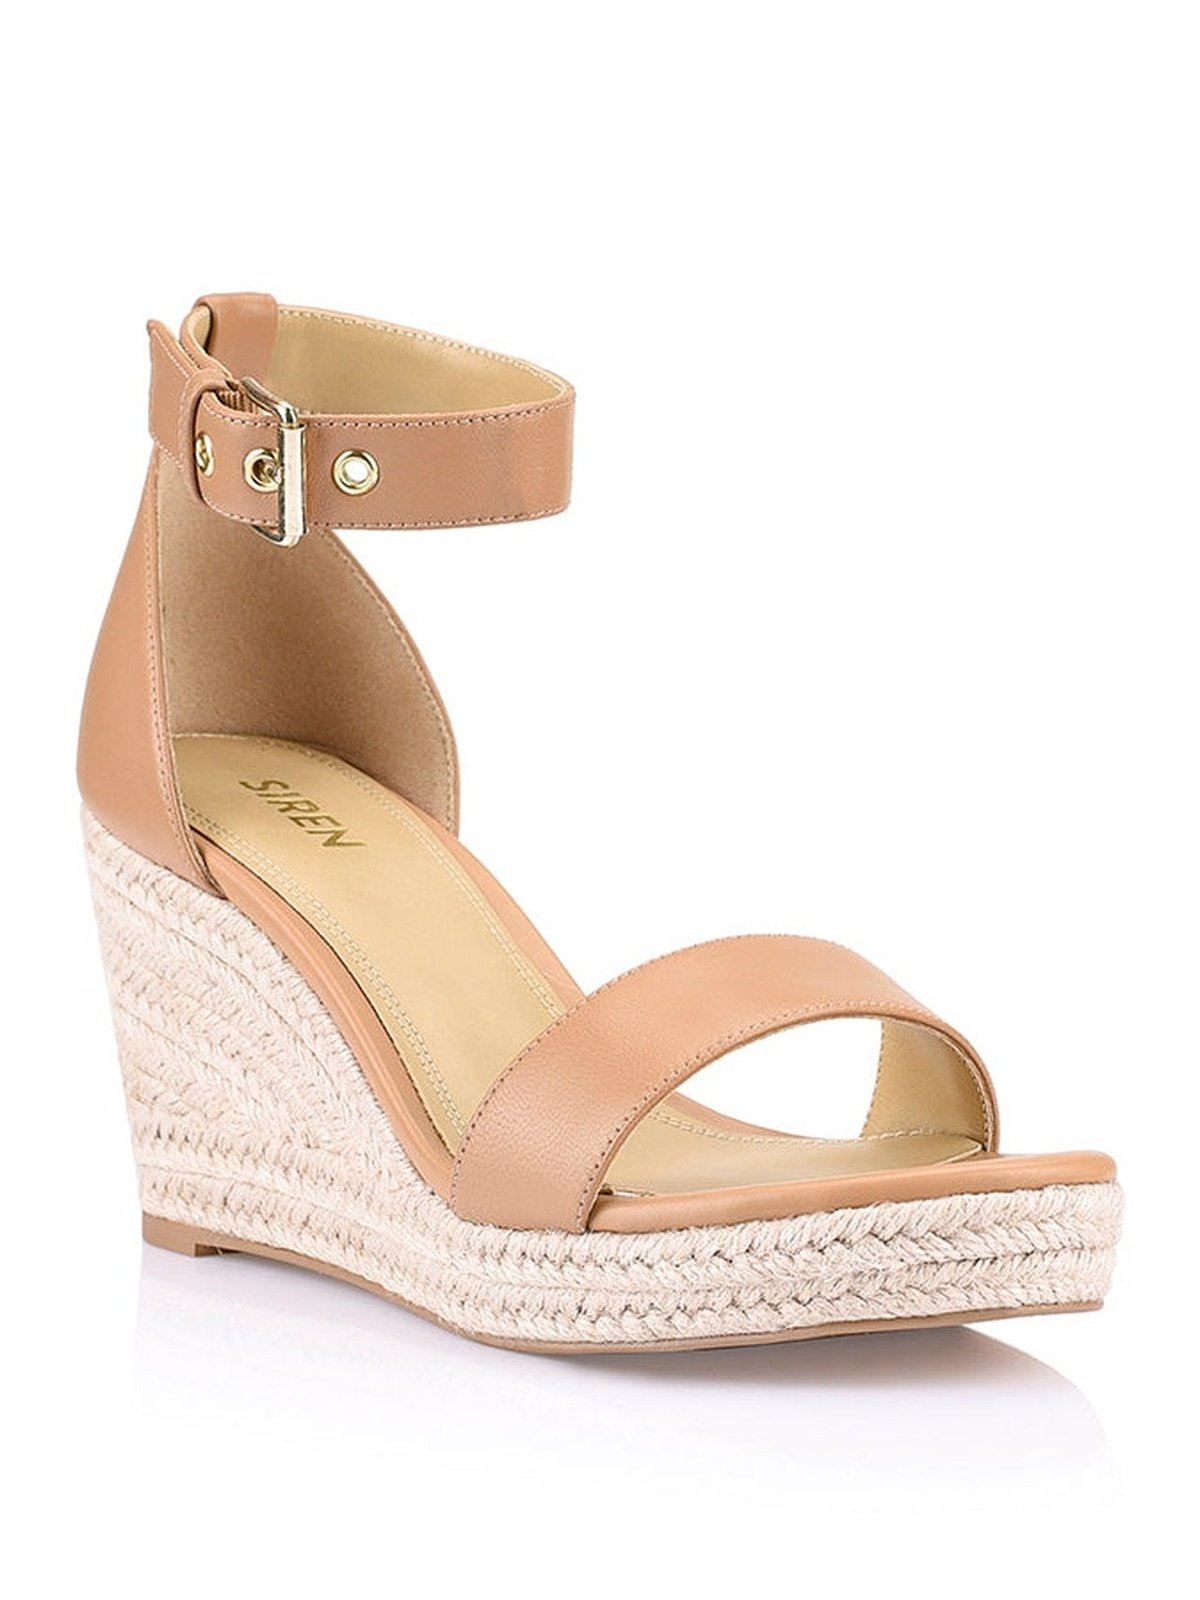 Reign II Wedge Sandals - Soft Tan Leather